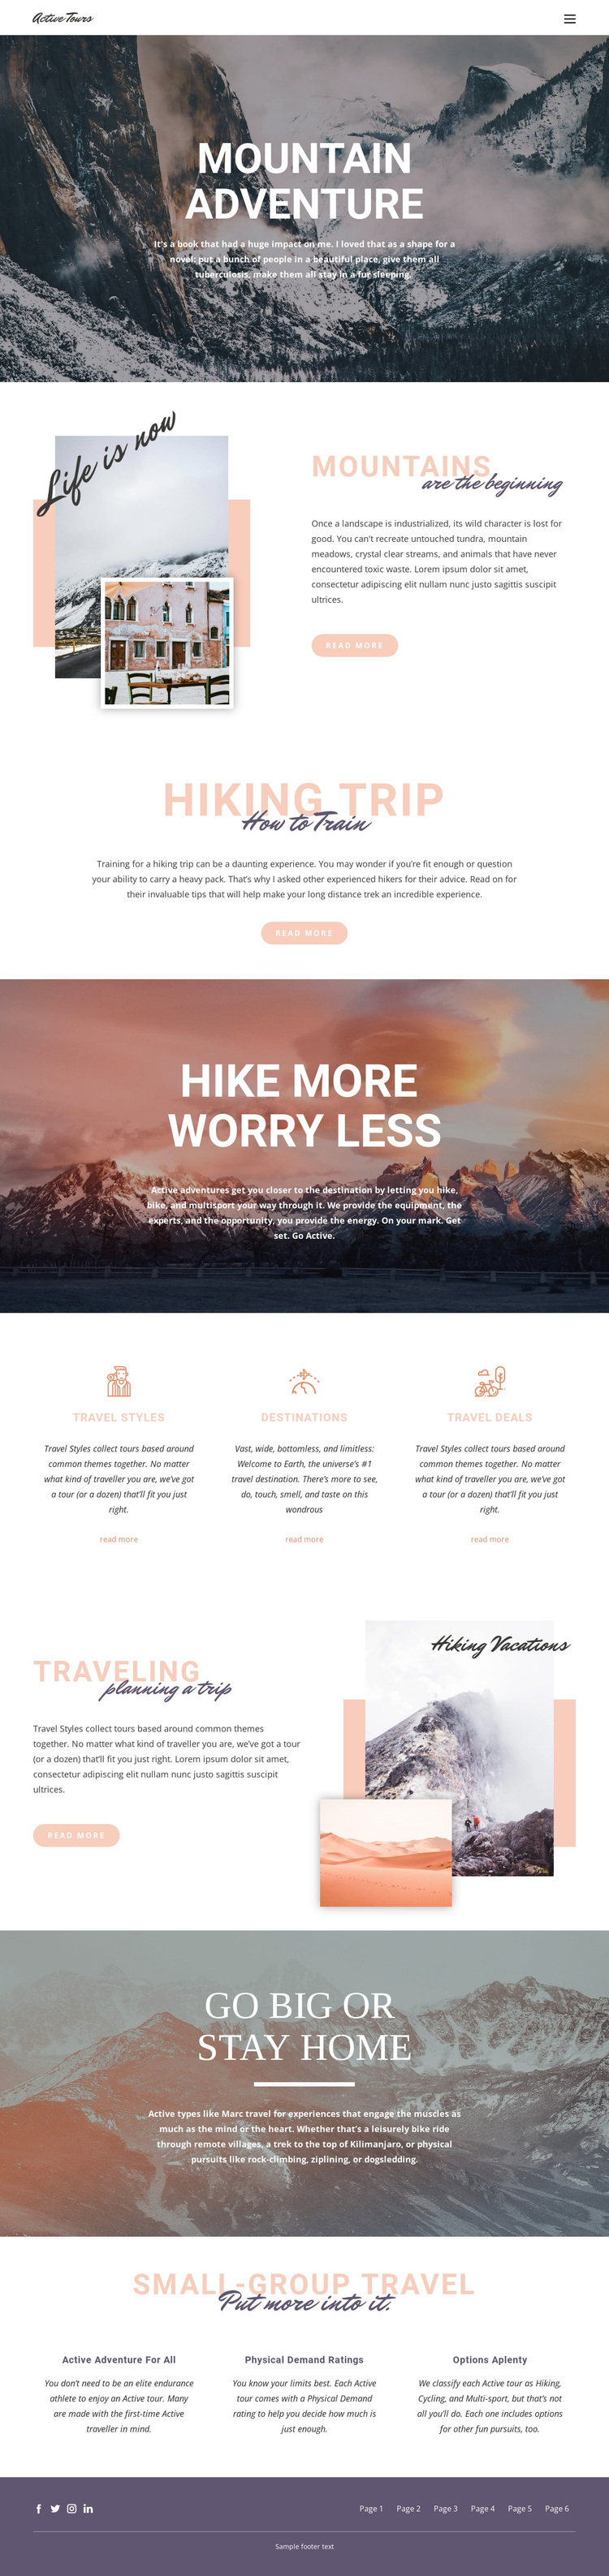 Guided backpacking trips Joomla Page Builder